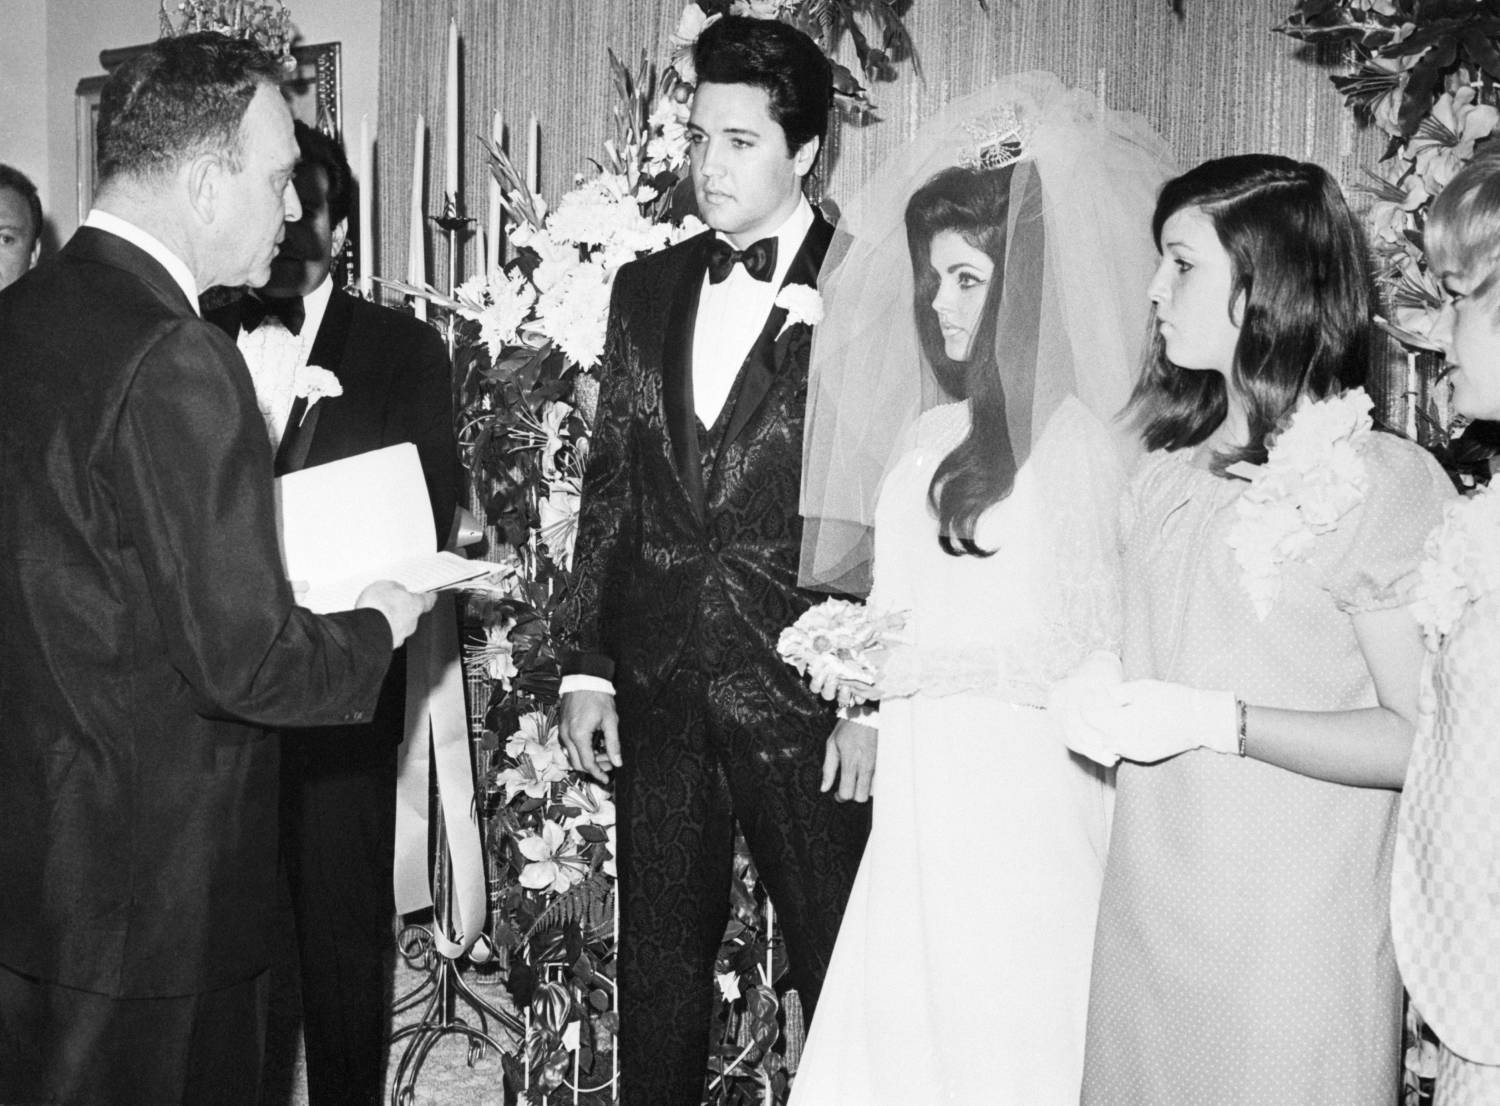 Elvis Presley and his bride, the former Priscilla Ann Beaulieu, are pronounced man and wife by Nevada Supreme Court Justice David Zenoff at the Aladdin Hotel. The bride's sister, Michelle Beaulieu (r) served as Maid of Honor at the wedding.